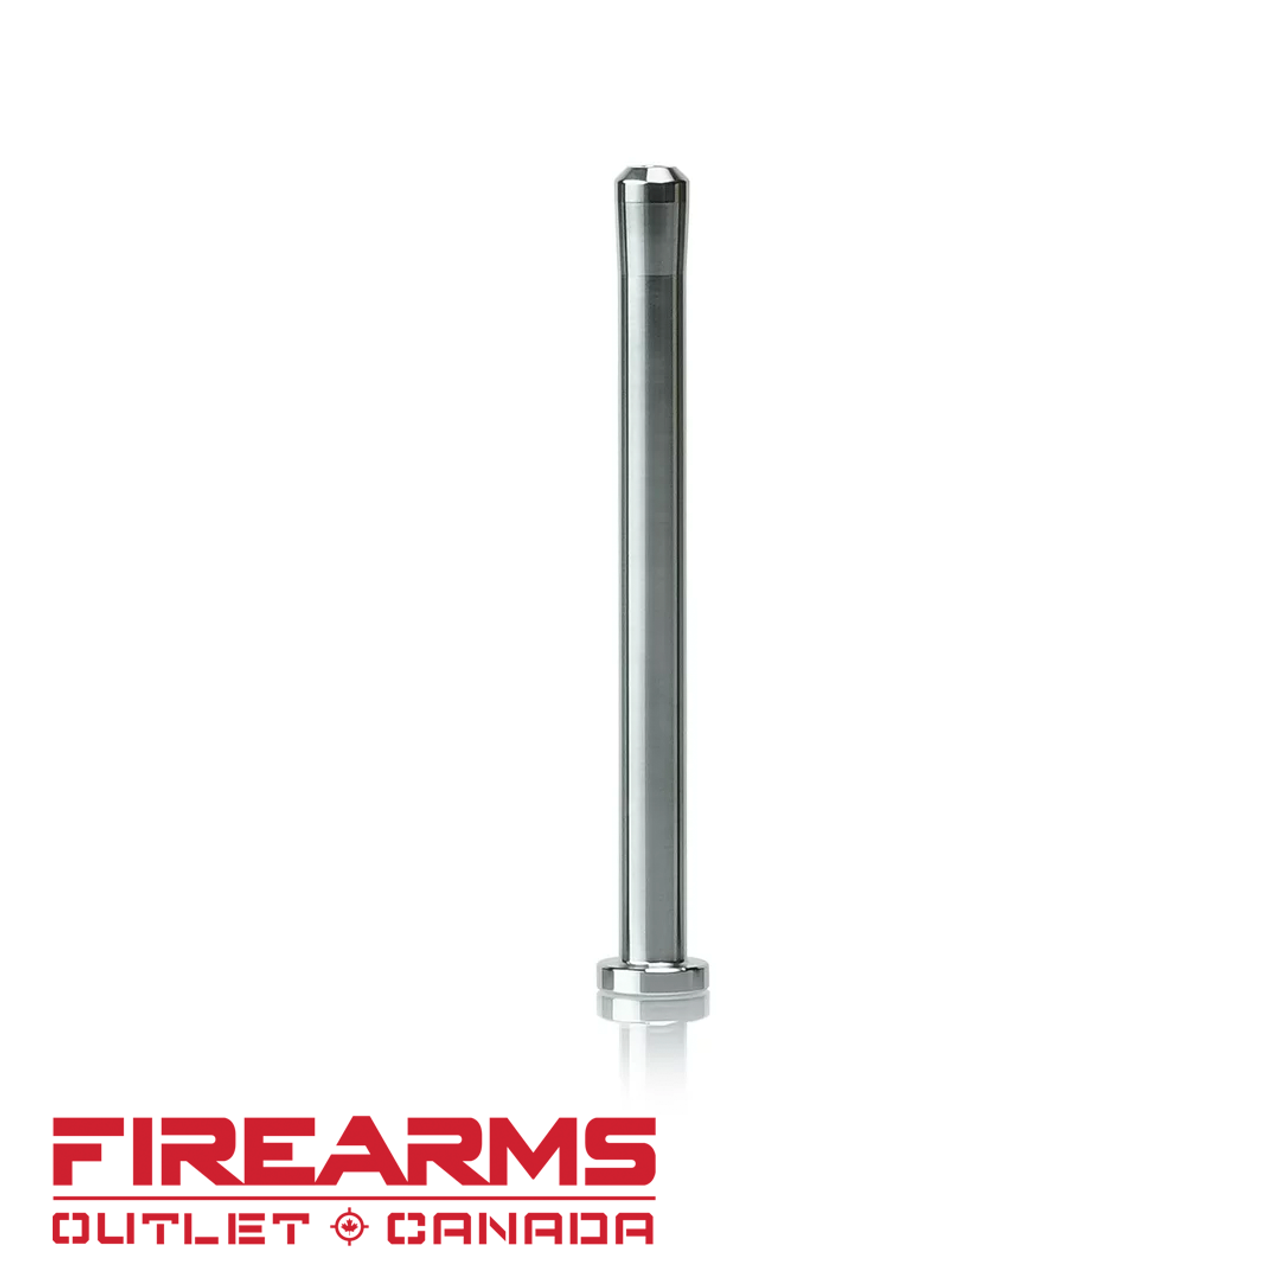 Lantac Flared Head Guide Rod (Stainless Steel) - Fits Glock 19 [01-GP-GR19-SS]